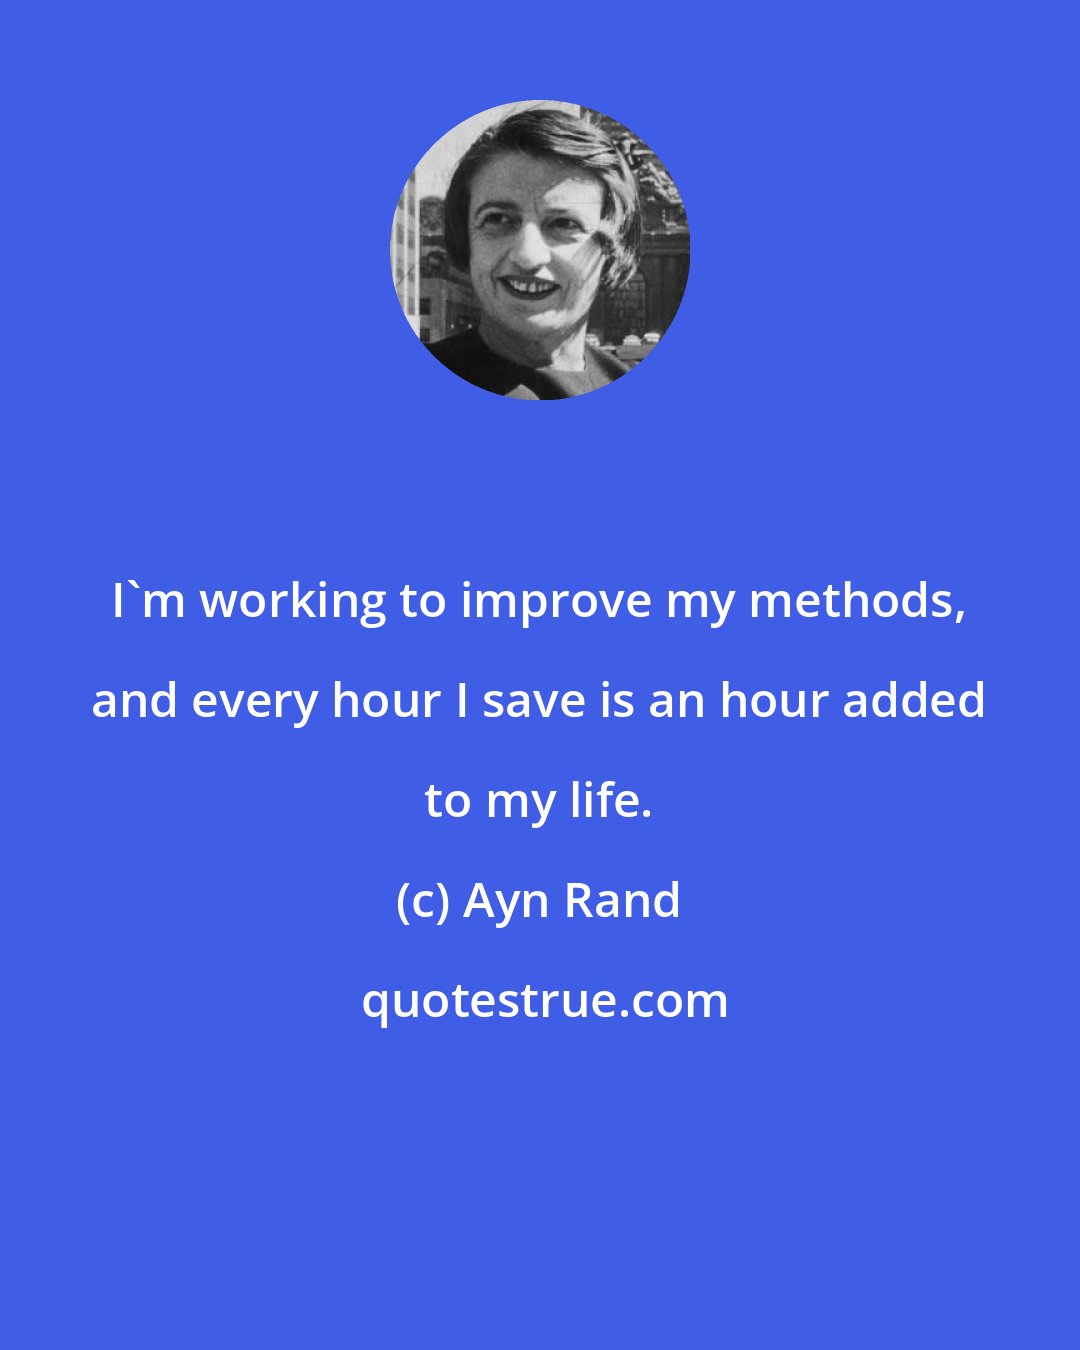 Ayn Rand: I'm working to improve my methods, and every hour I save is an hour added to my life.